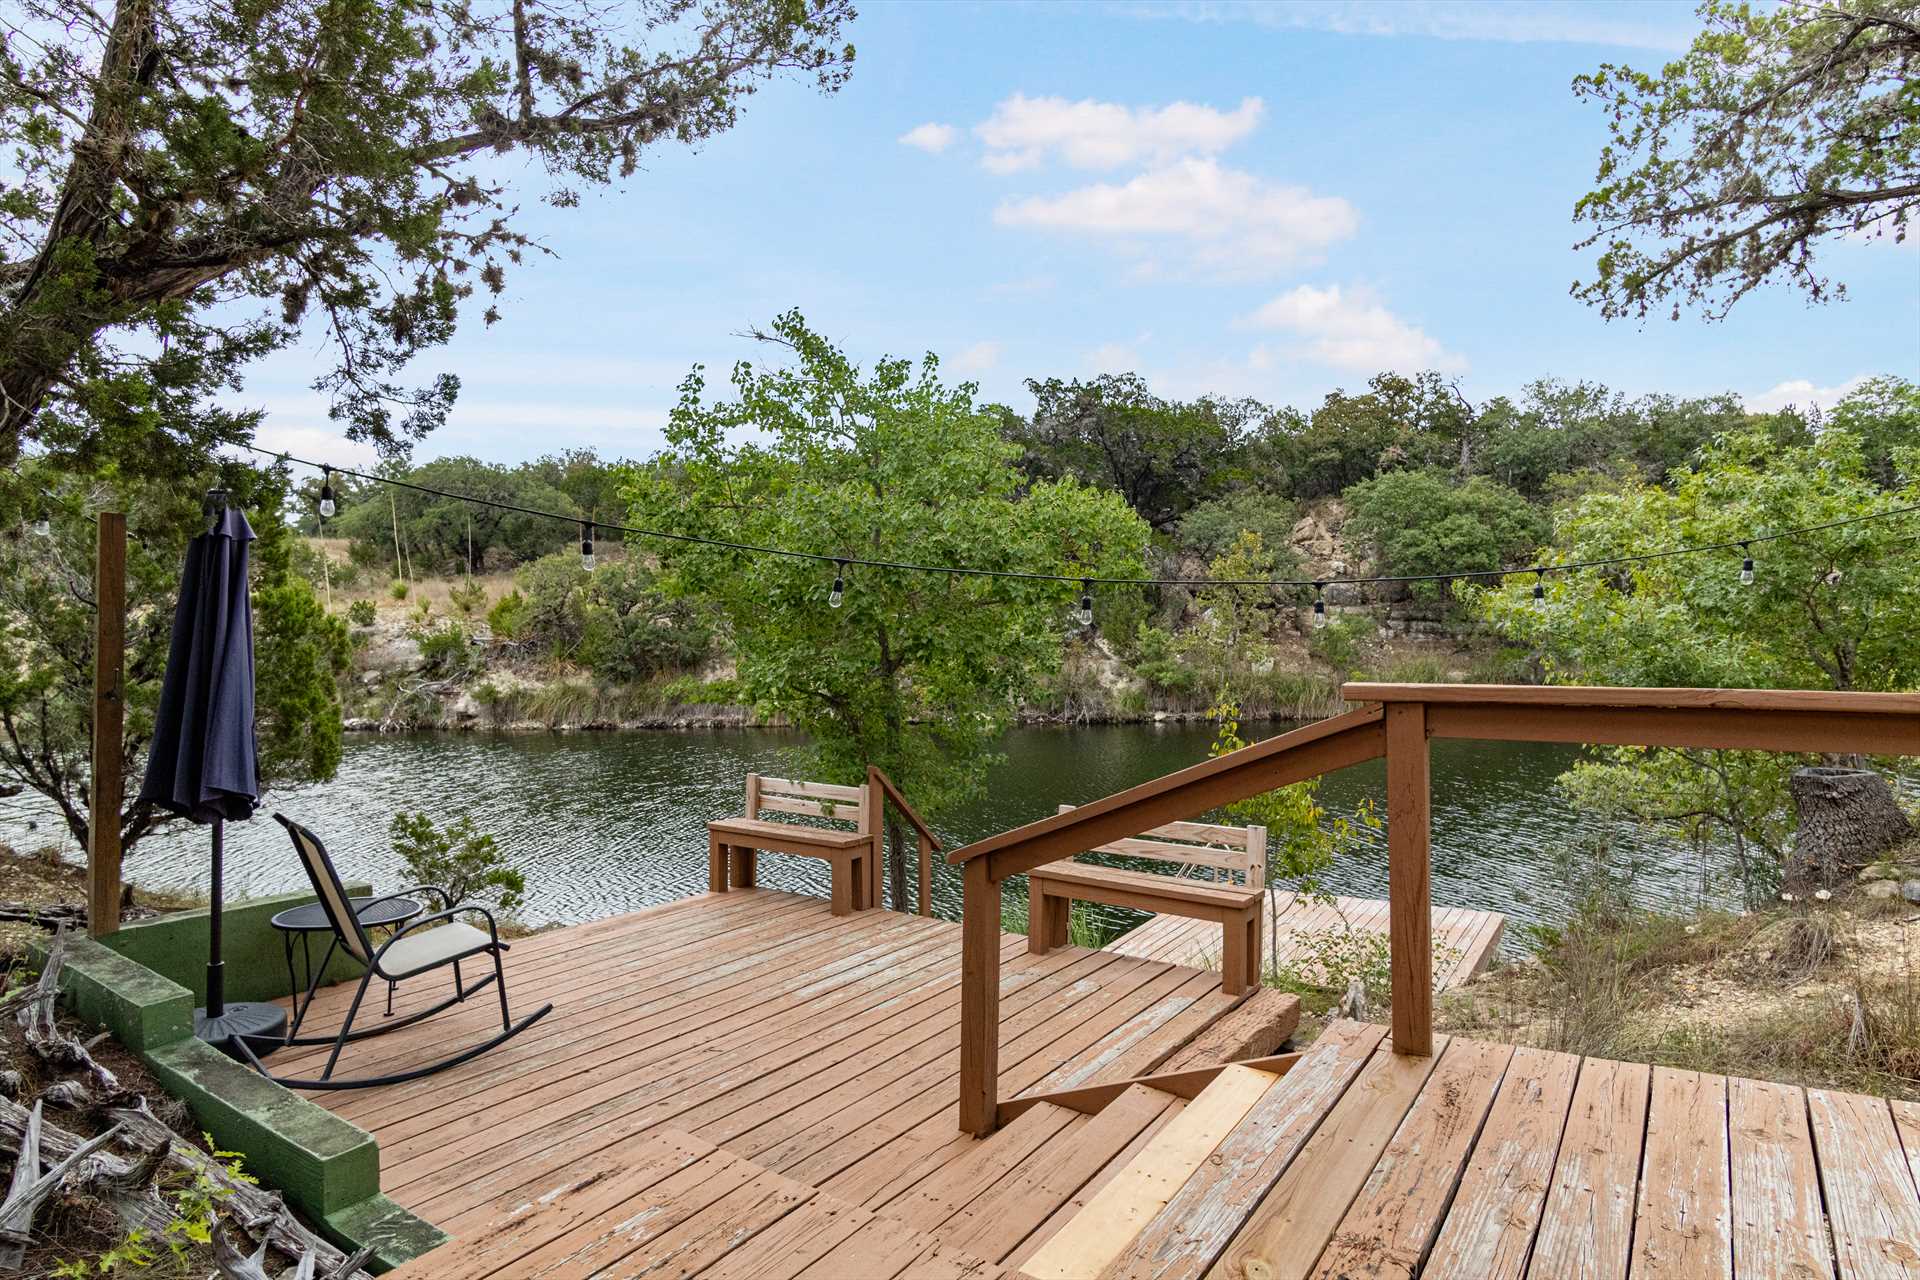                                                 The Hideaway's dock offers access to the water, and it's a nice and peaceful spot to just kick back and relax, too.